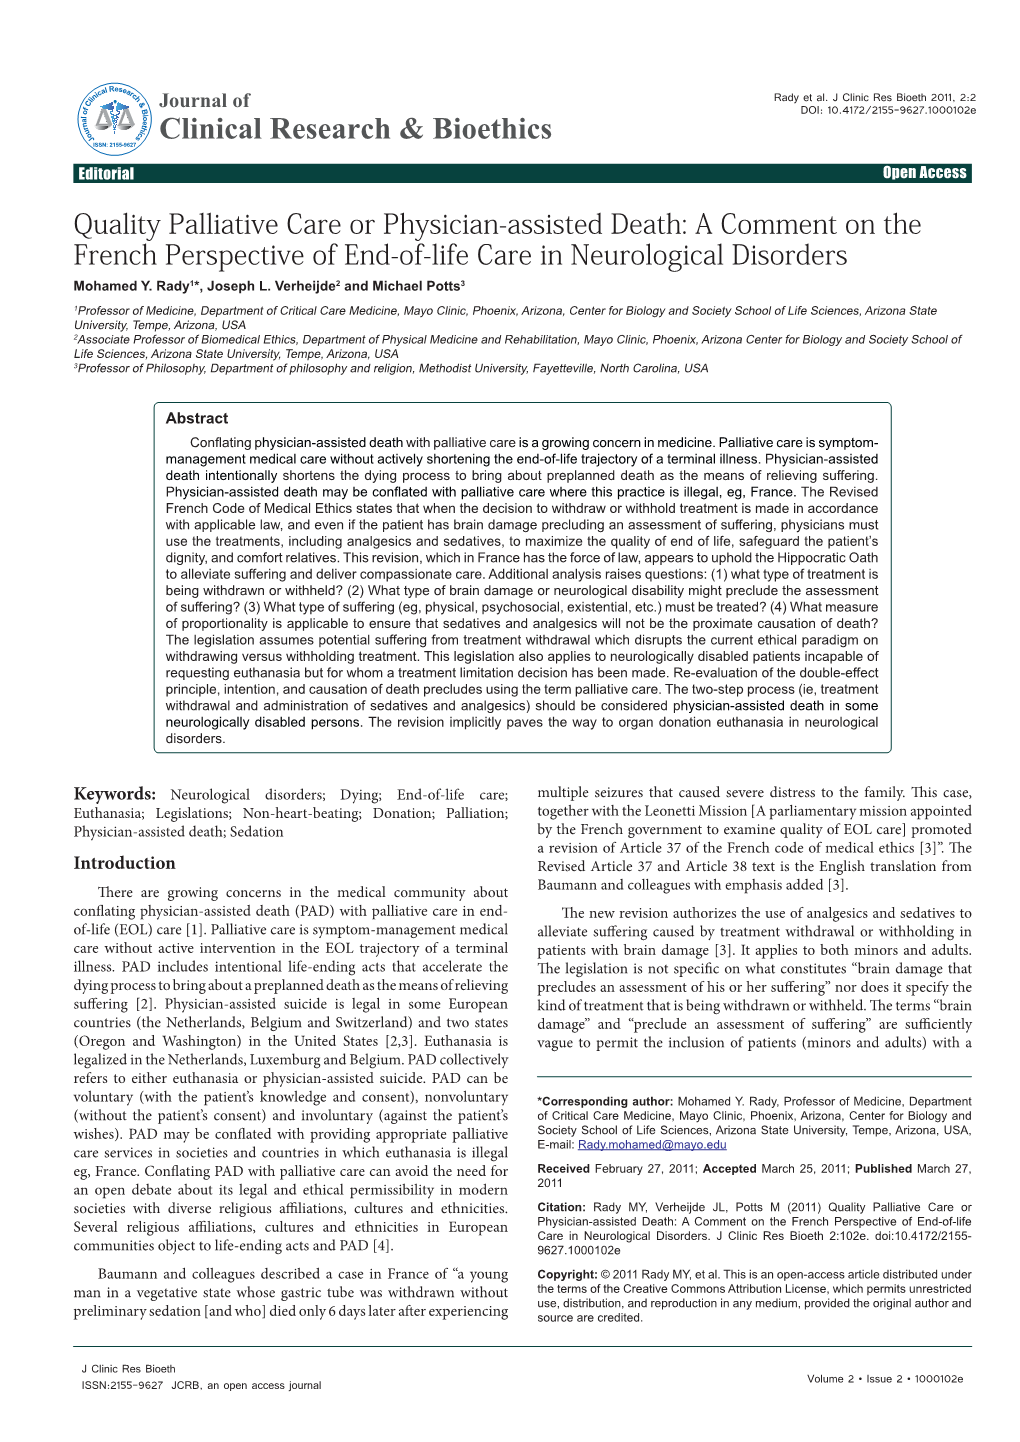 Quality Palliative Care Or Physician-Assisted Death: a Comment on the French Perspective of End-Of-Life Care in Neurological Disorders Mohamed Y